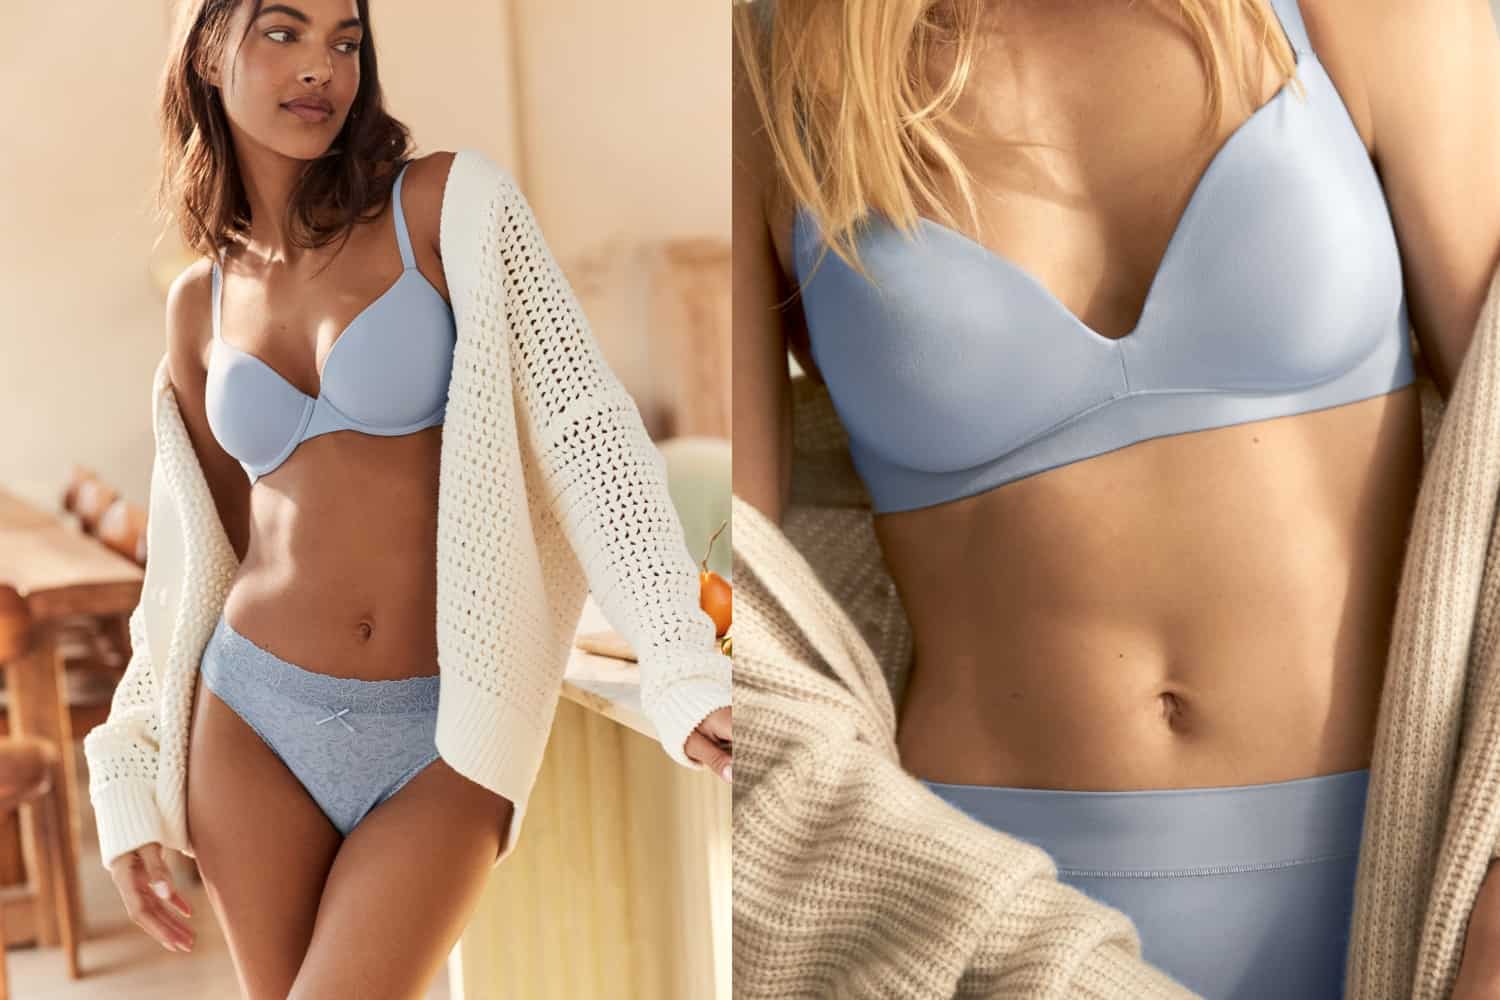 Mix & Match Any Three Underwear Styles From Haven Well Within For $30